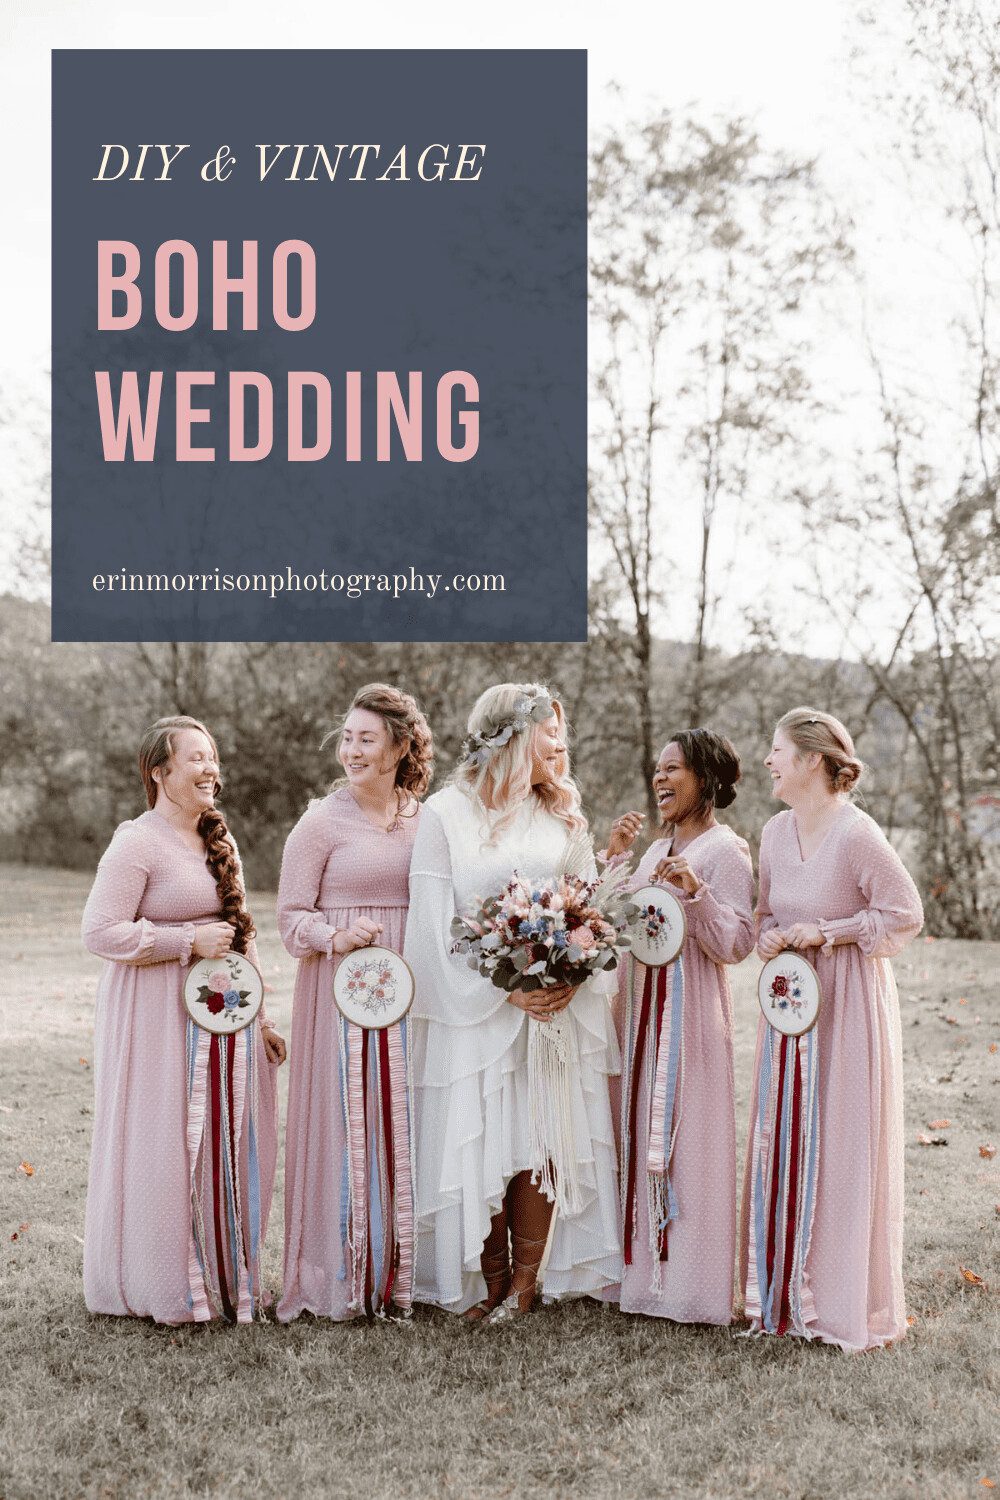 DIY Vintage Boho Wedding in Tennessee by Erin Morrison Photography